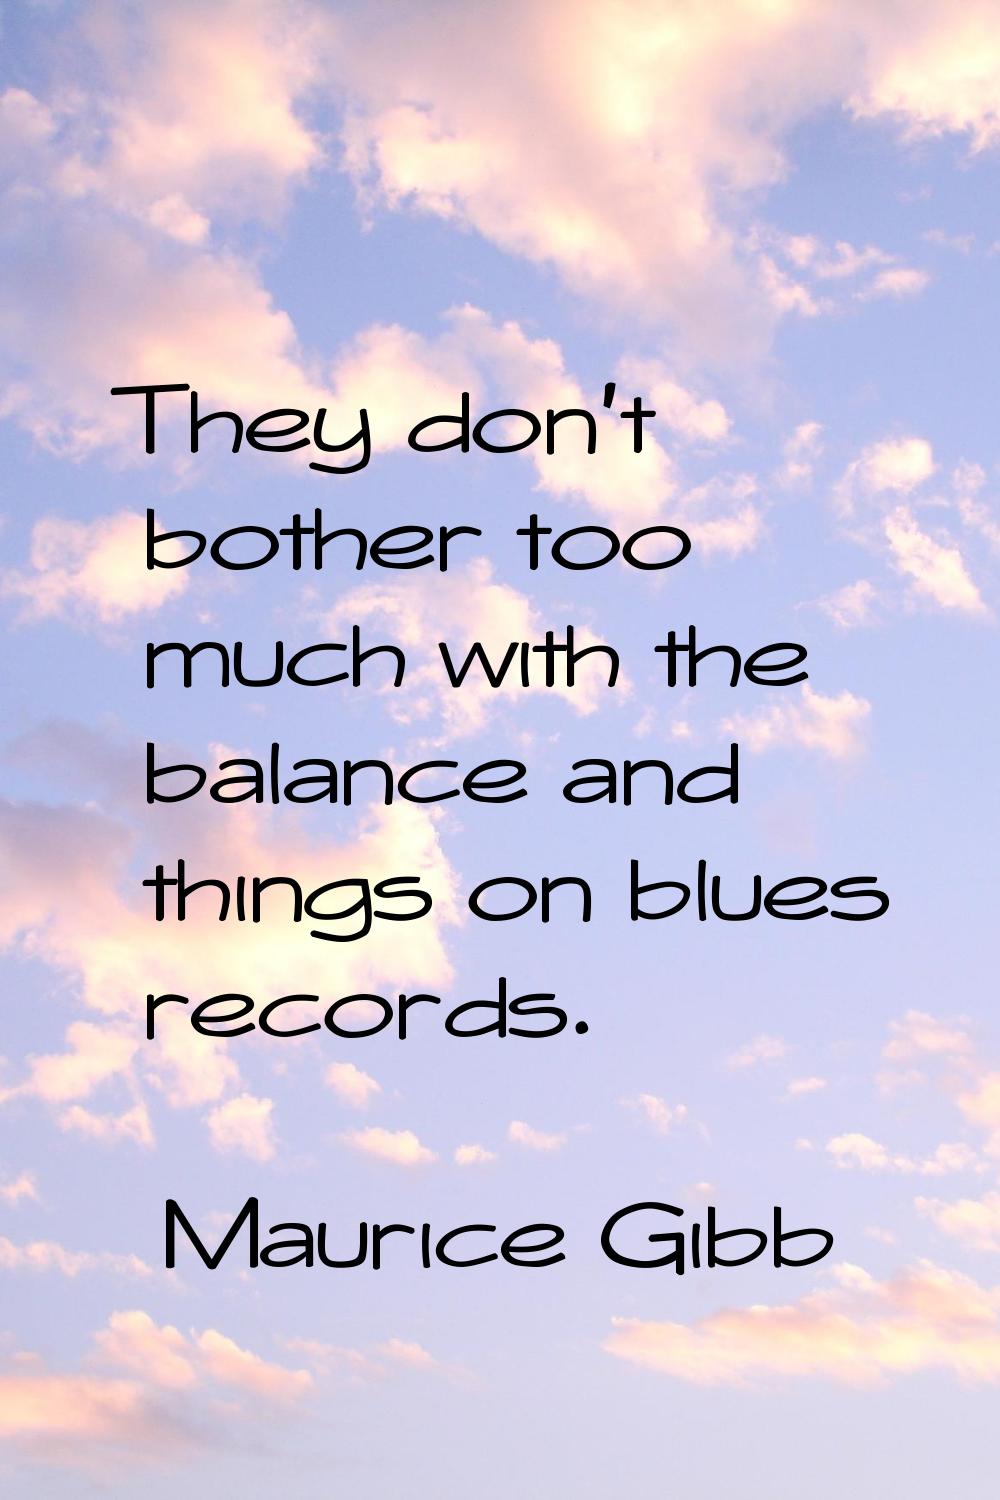 They don't bother too much with the balance and things on blues records.